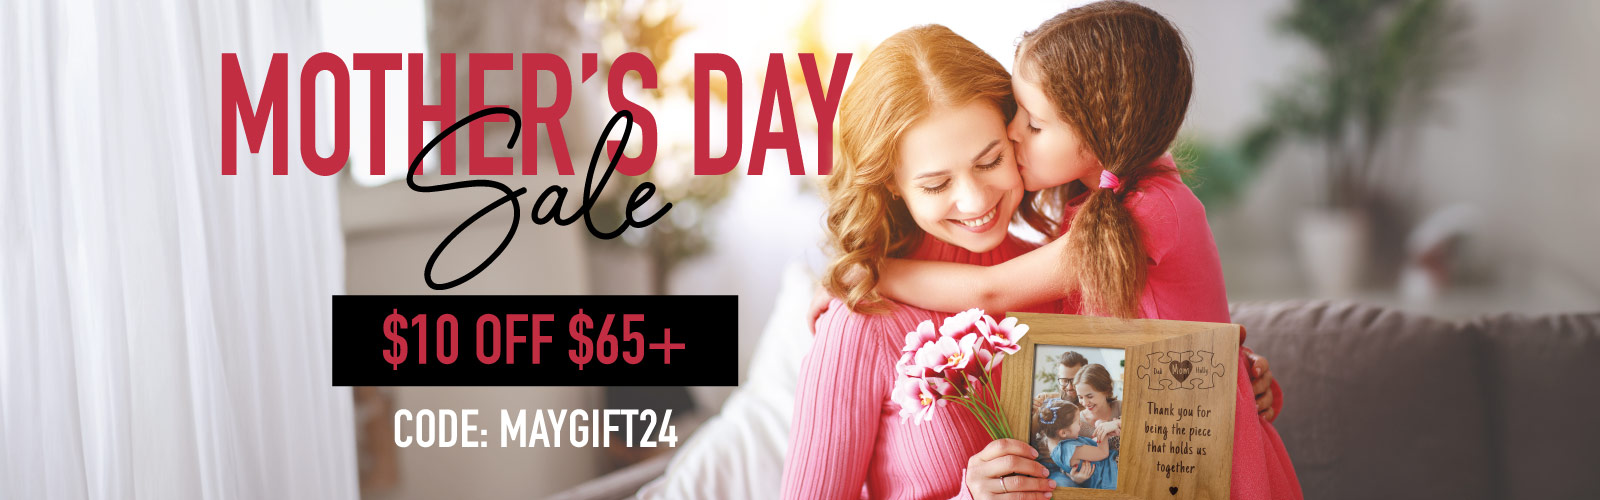 Get $10 off orders of $65 or more. Use code MAYGIFT24 at checkout. Image features a young girl gifting her mother a custom engraved picture frame.